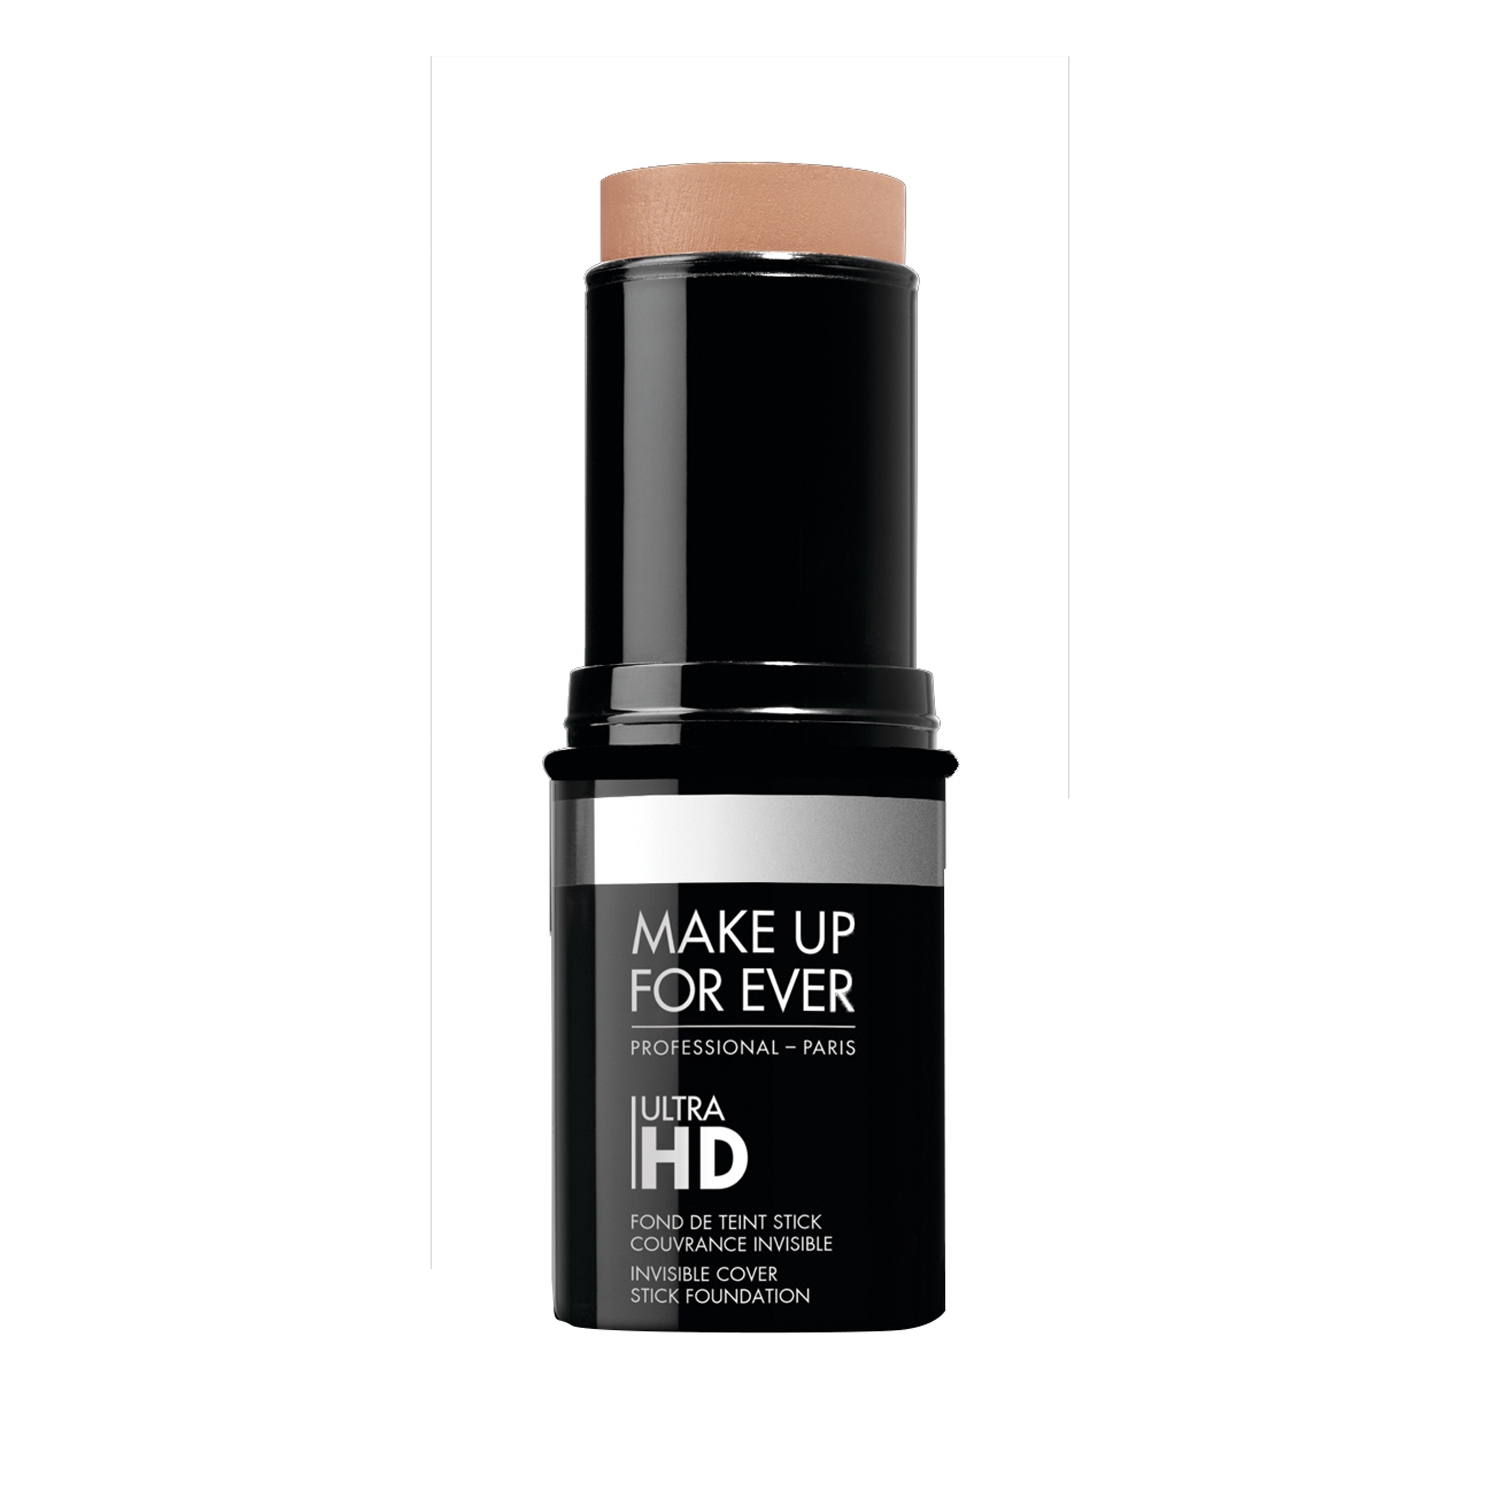 Make Up For Ever, Tira: Shop Makeup, Skin, Hair & Beauty Products Online